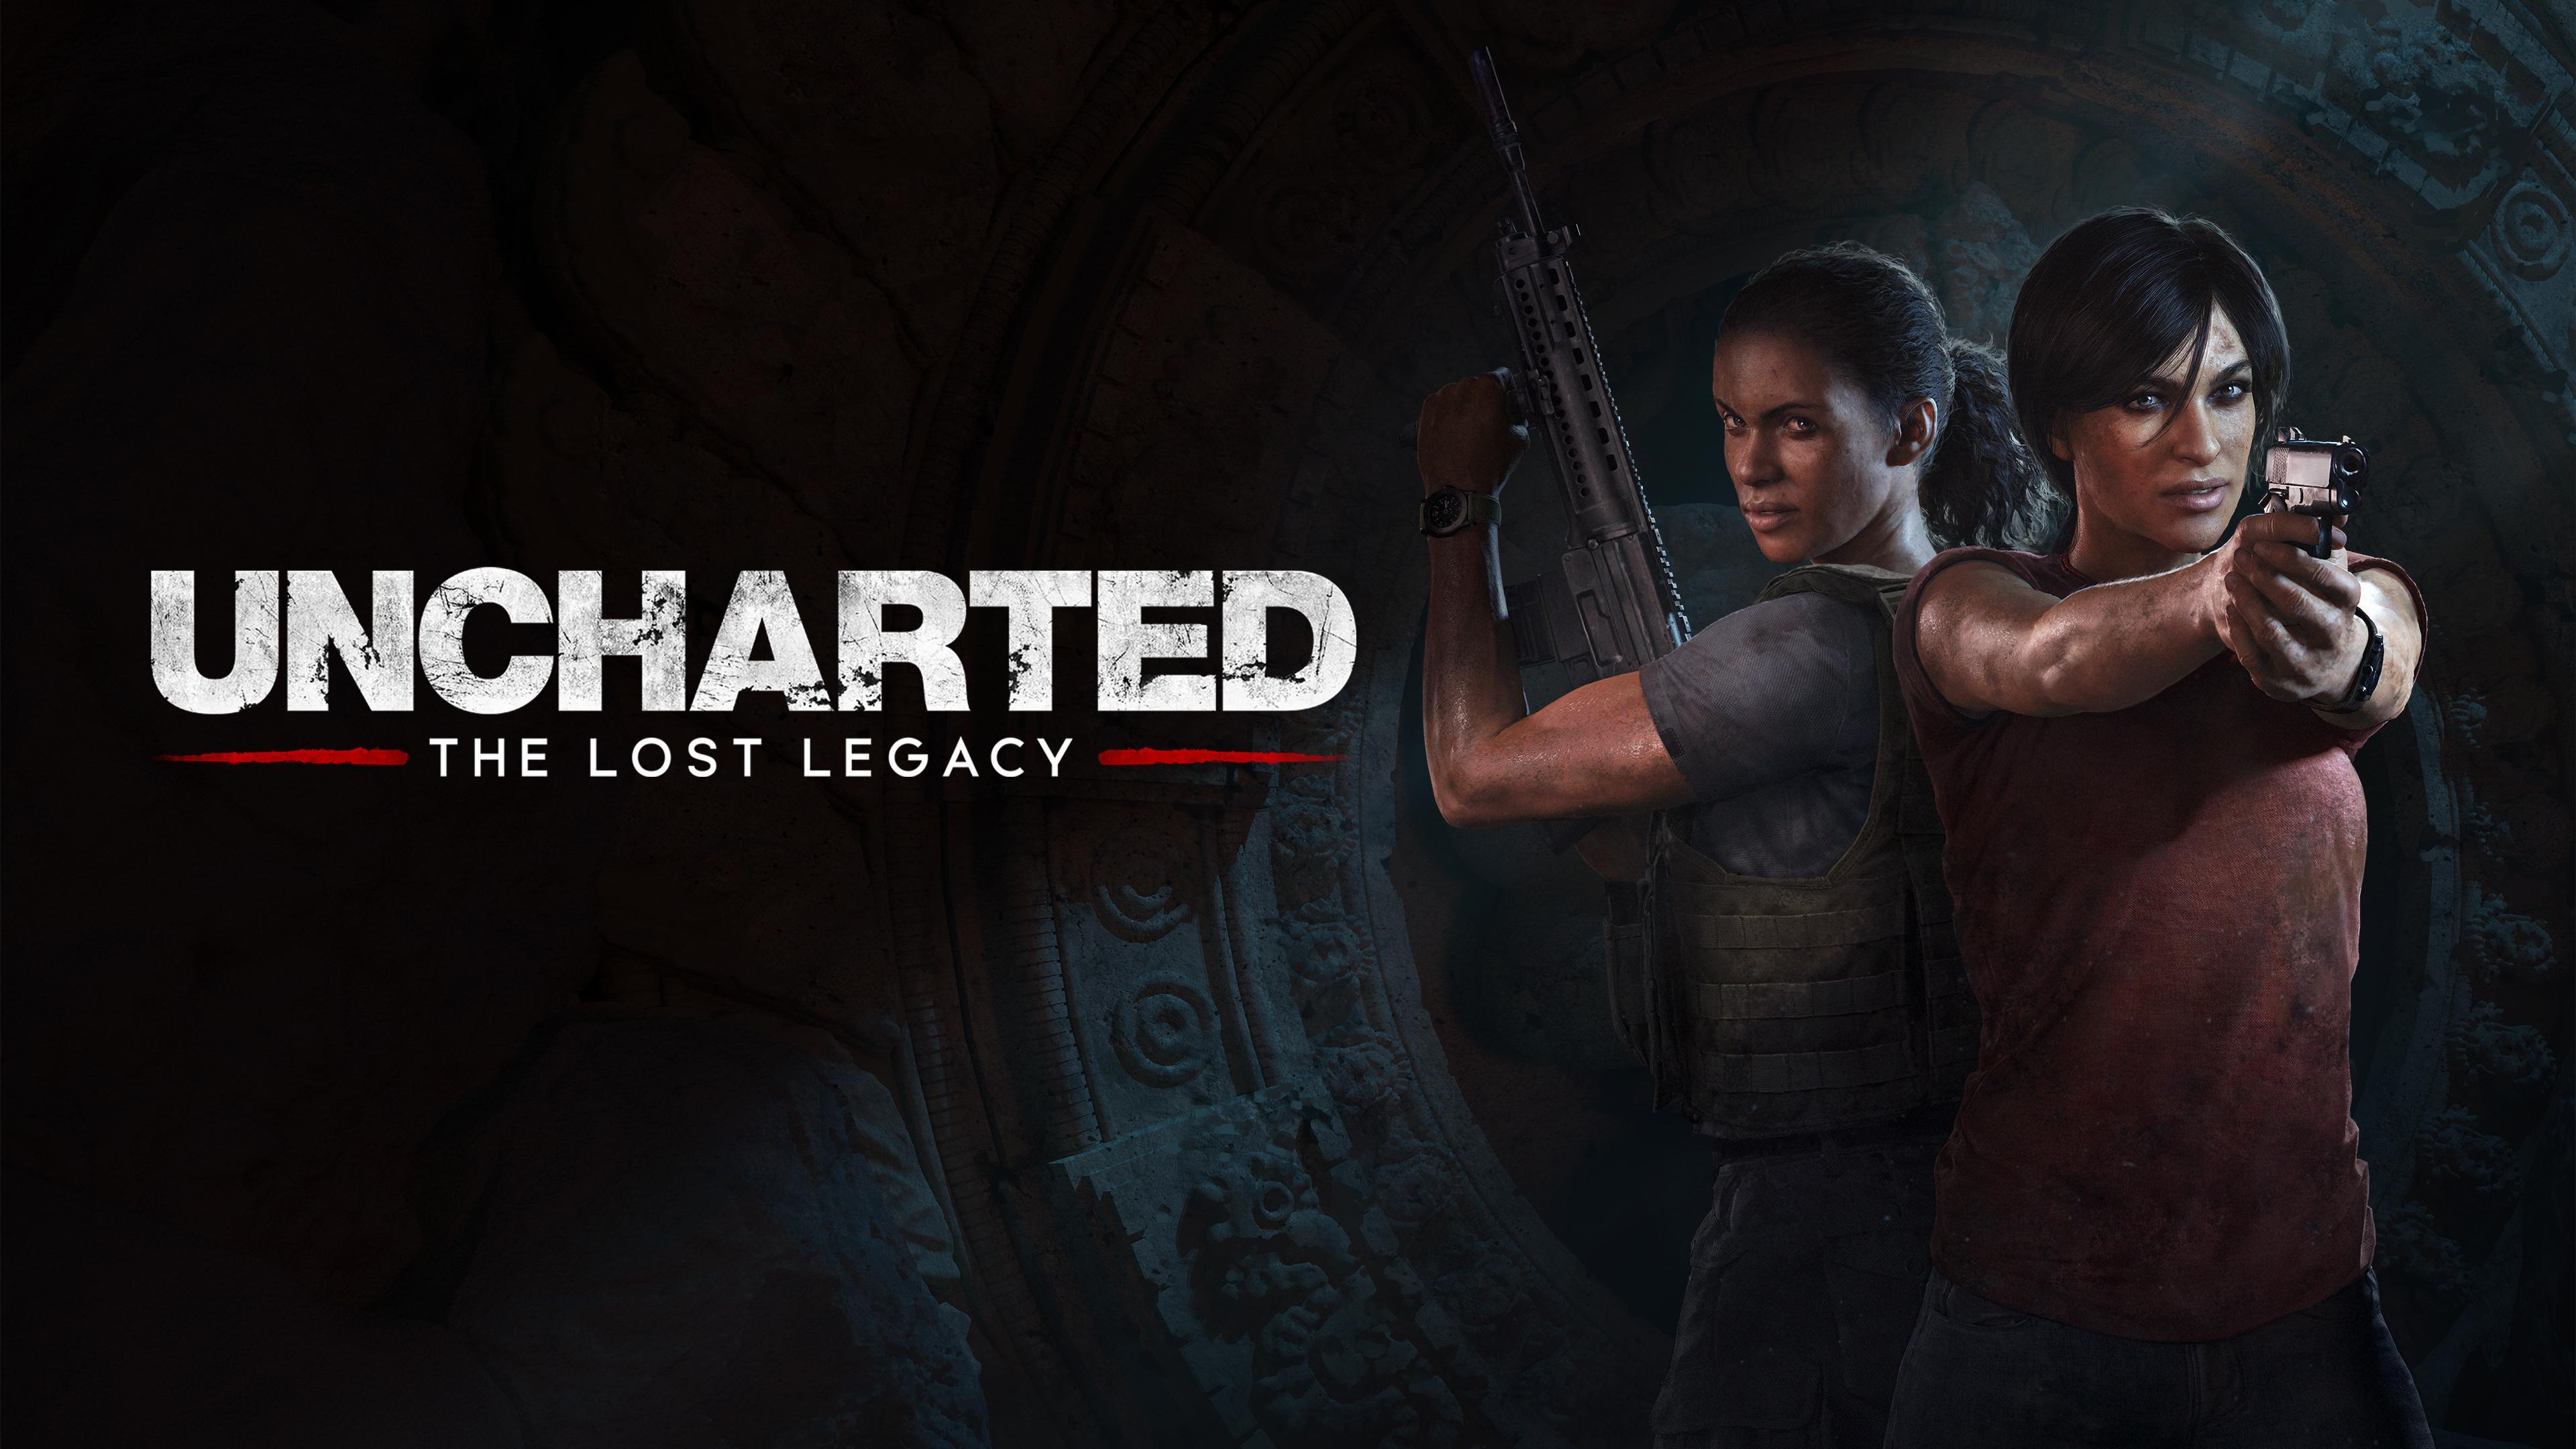 UNCHARTED: THE LOST LEGACY Photo, Image and Wallpaper